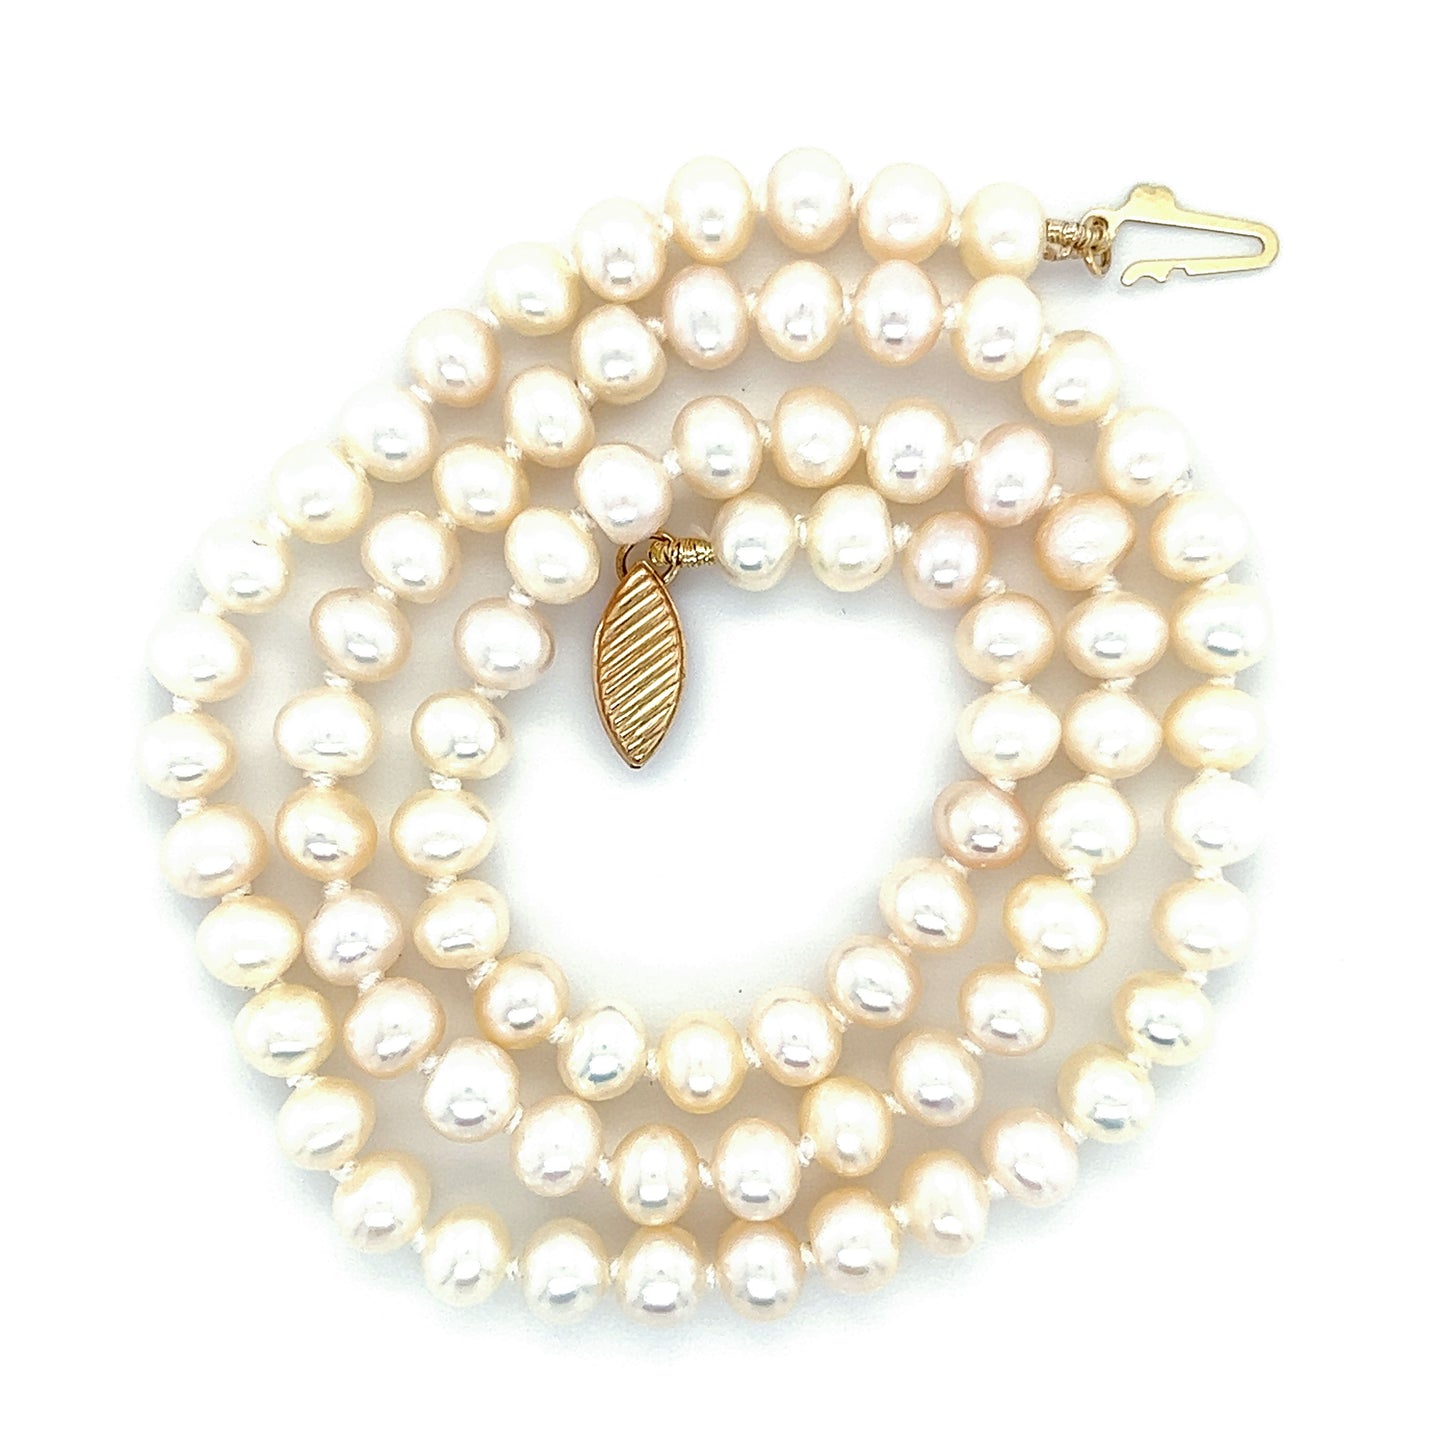 Cultured White Freshwater Pearl Necklace with 14K Yellow Gold Clasp